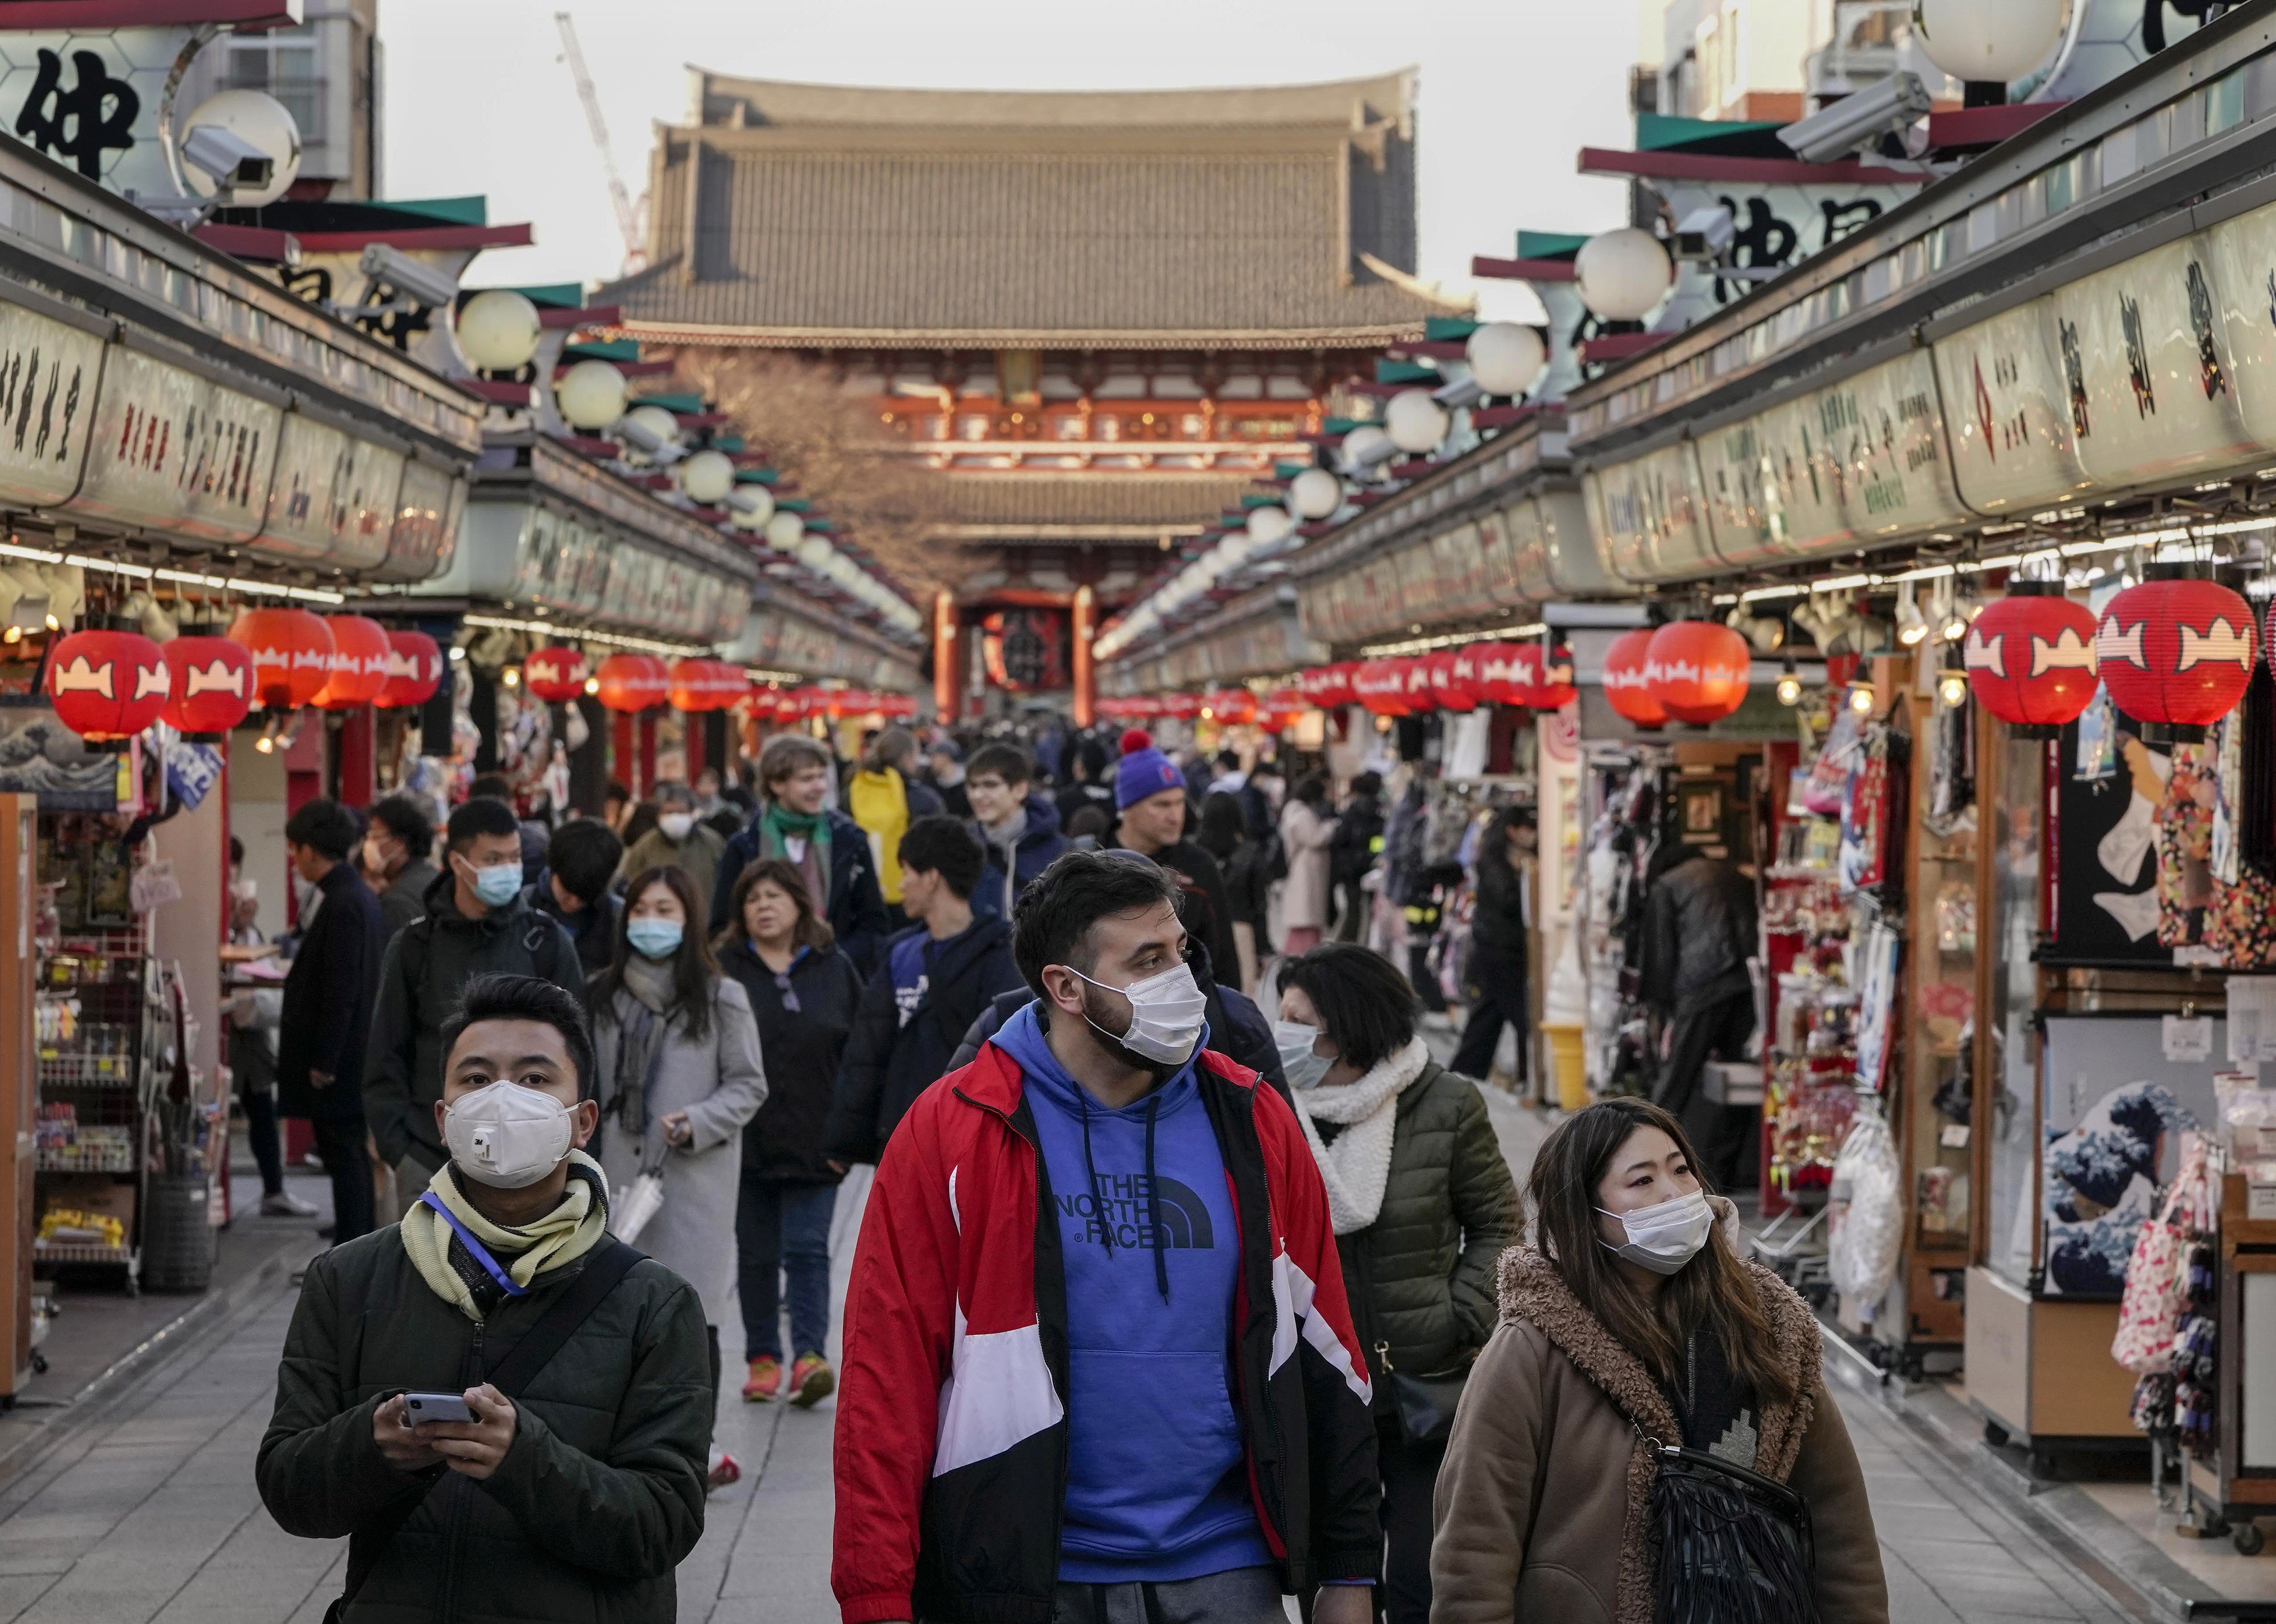 Tourists wearing masks seen in the Asakusa district of Tokyo, Japan, March 5, 2020. Overseas Chinese can use AliPay to get free online consultations with doctors in mainland China. Photo: EPA-EFE